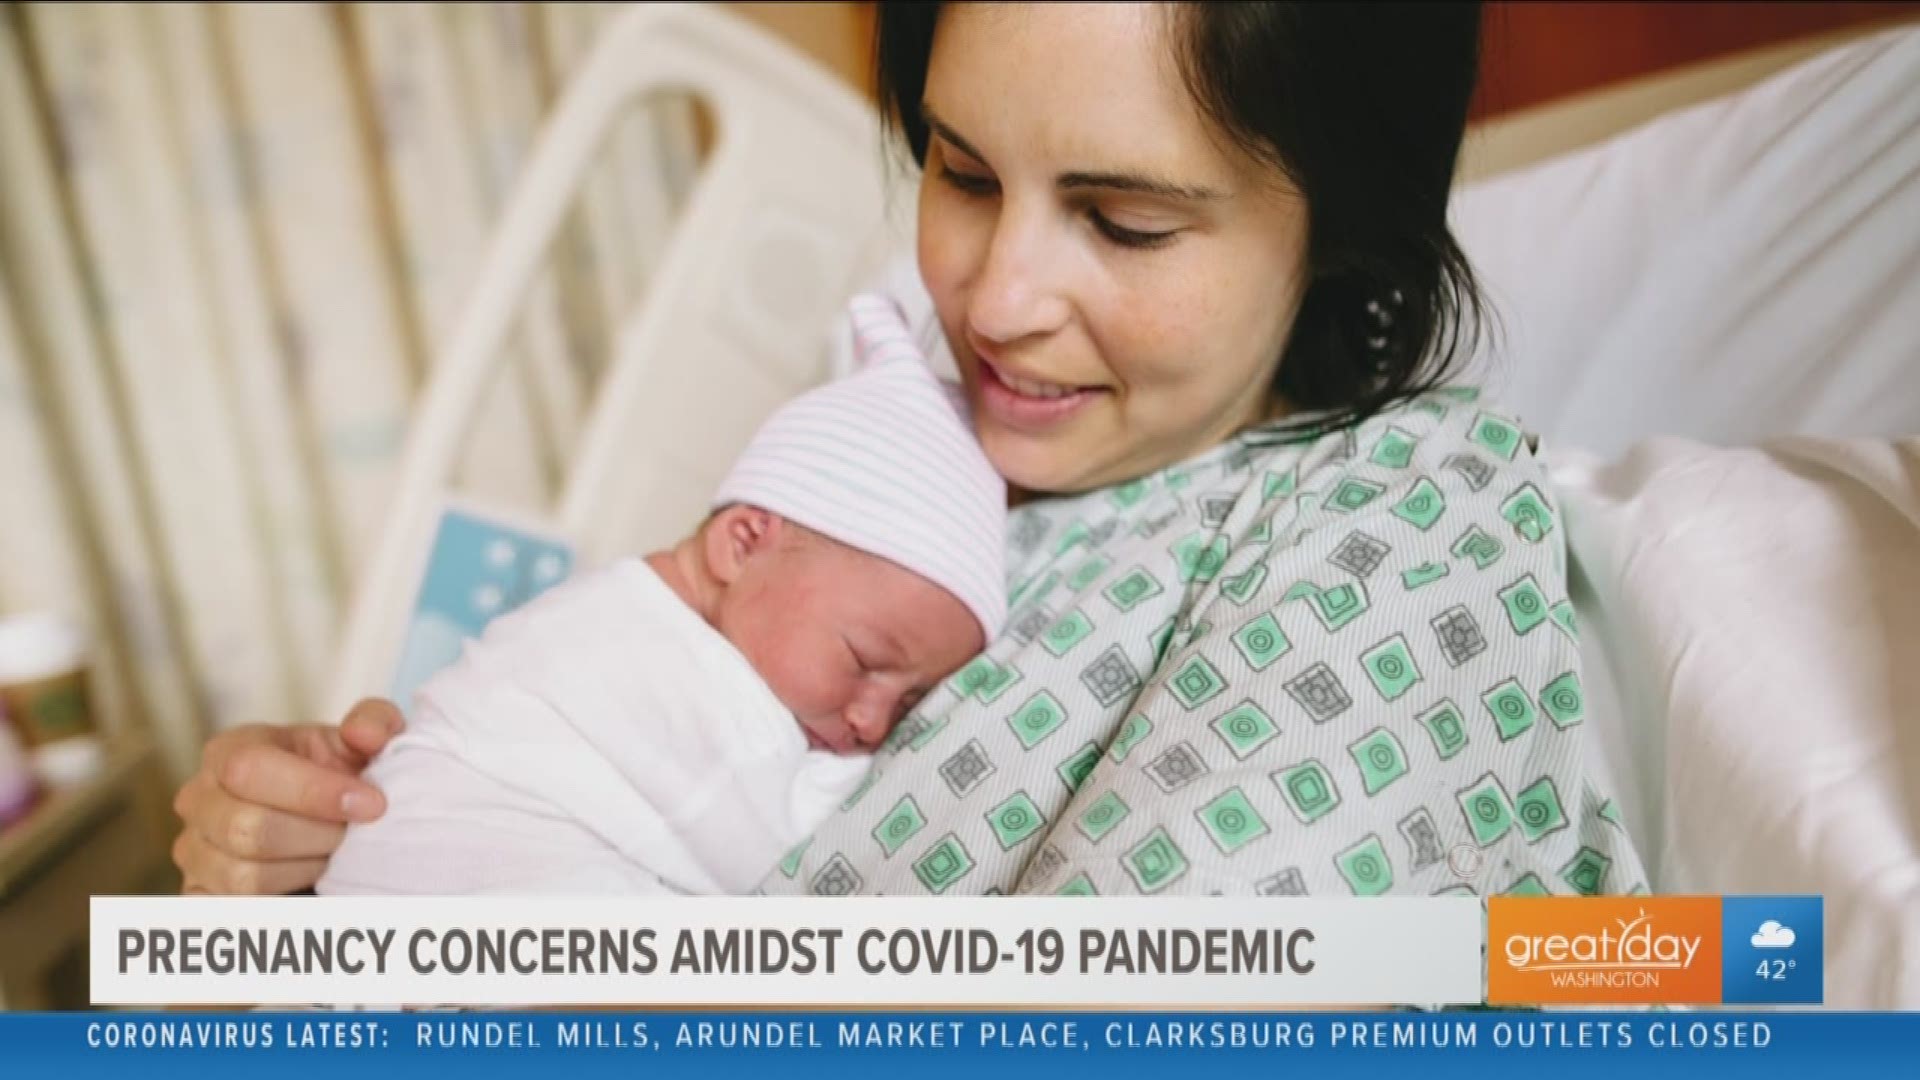 Stacey D. Stewart, President & CEO of March of Dimes, gives women guidelines on how to navigate their pregnancy and life after birth during the COVID-19 outbreak.